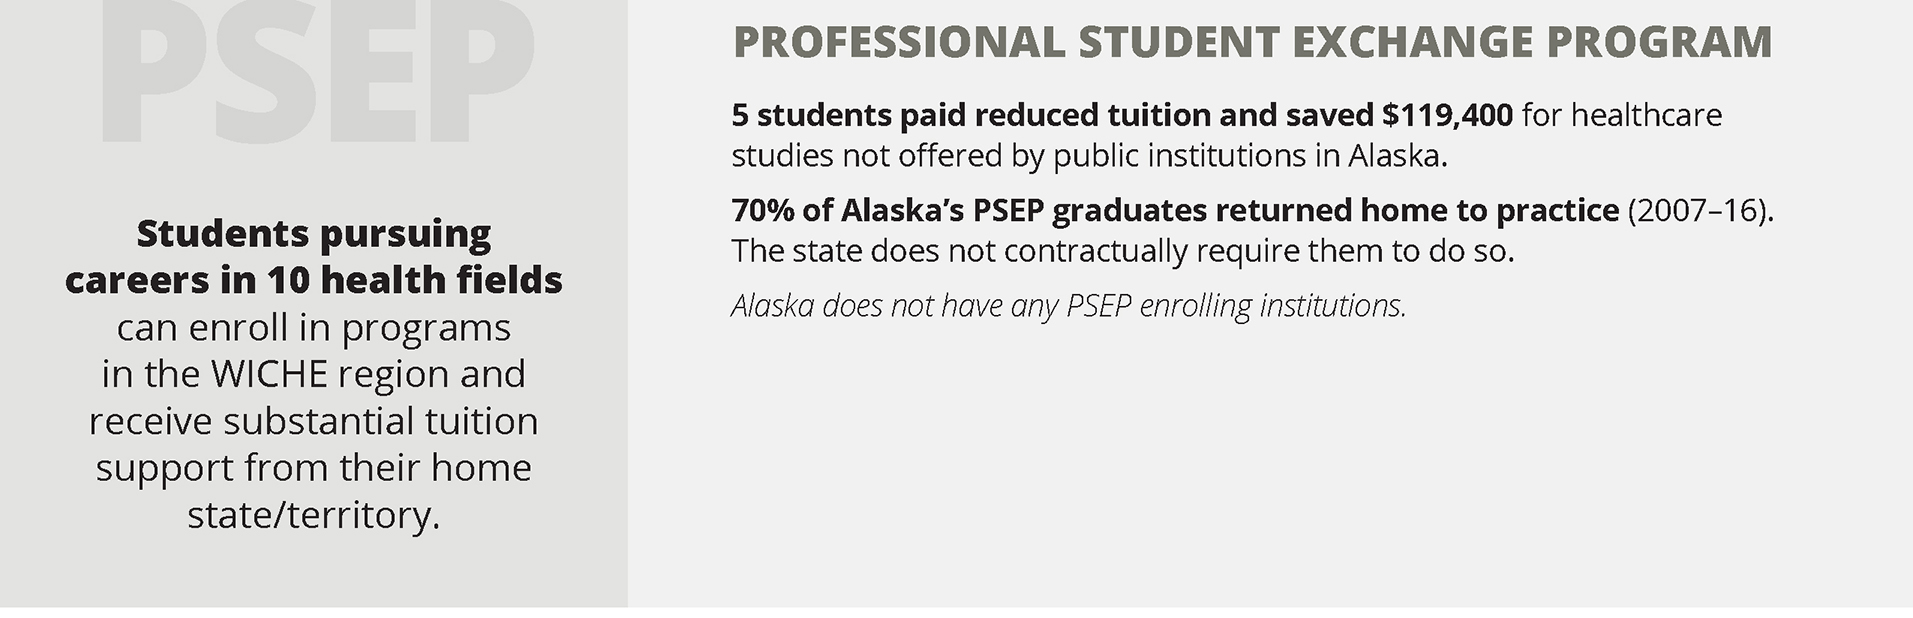 Infographic on Alaska Professional Student Exchange Program data. Details of infographic listed below.